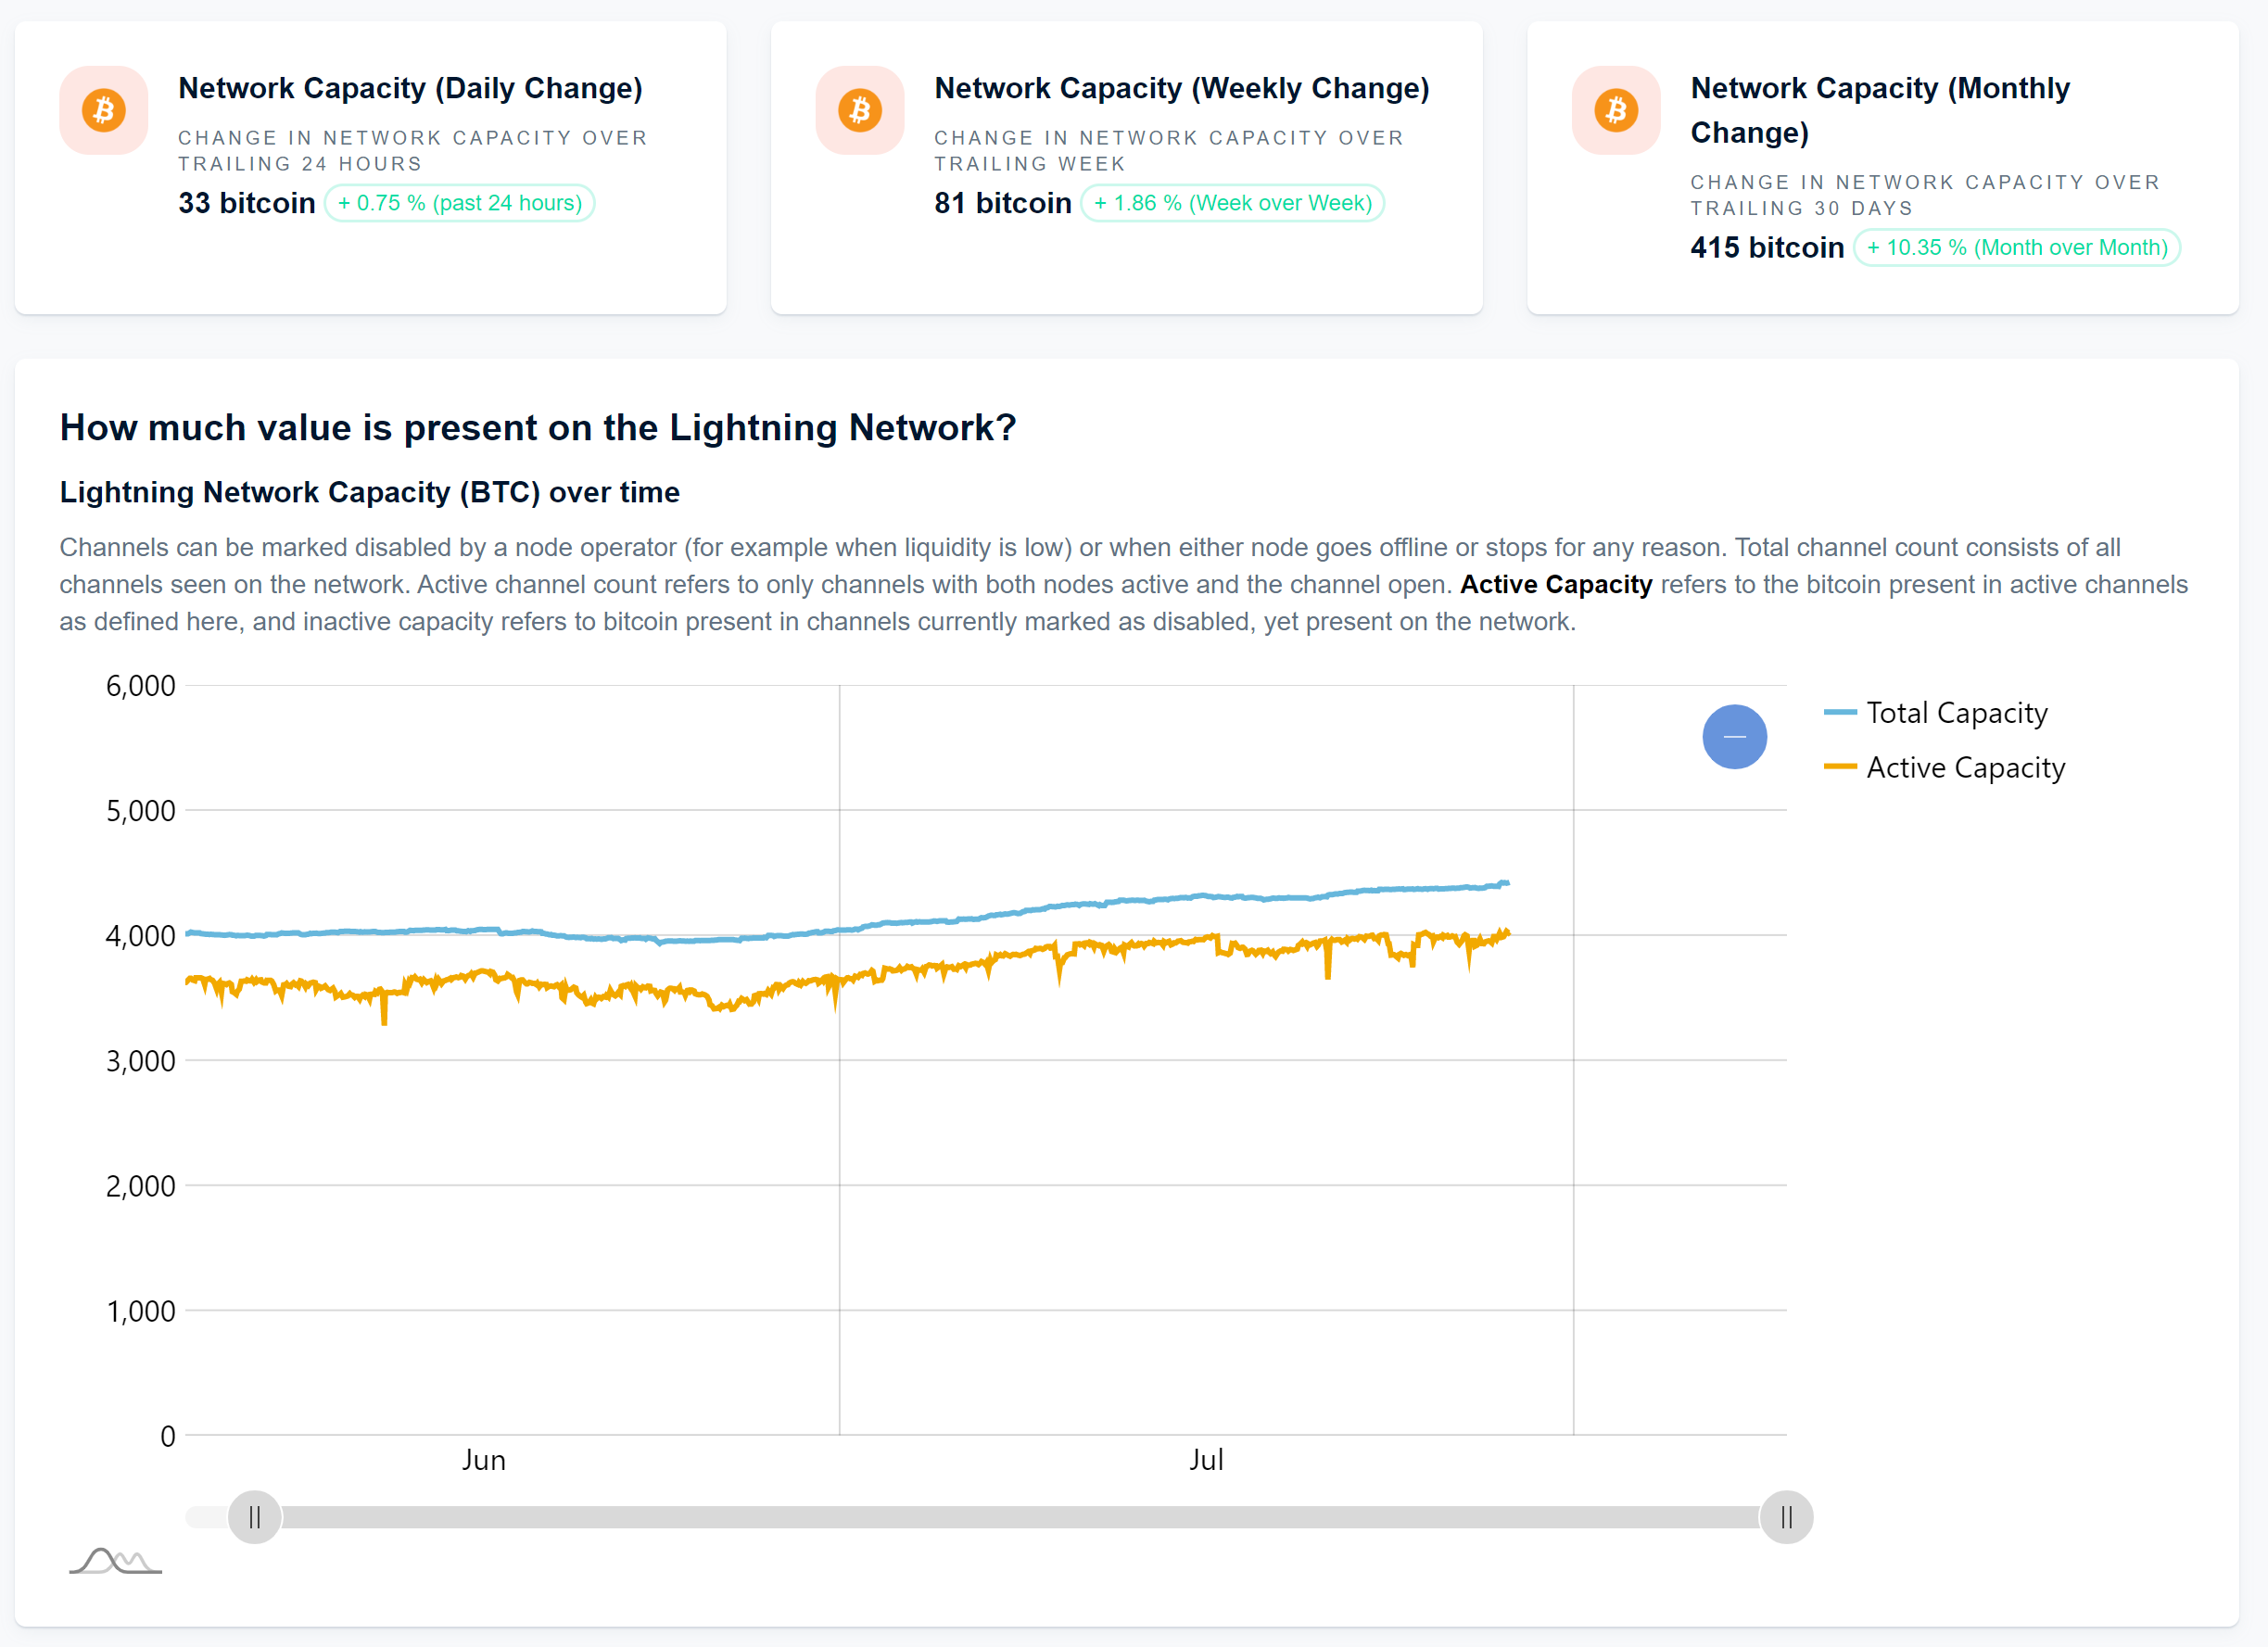 Bitcoin Exchanges on the Lightning Network and their Capacity